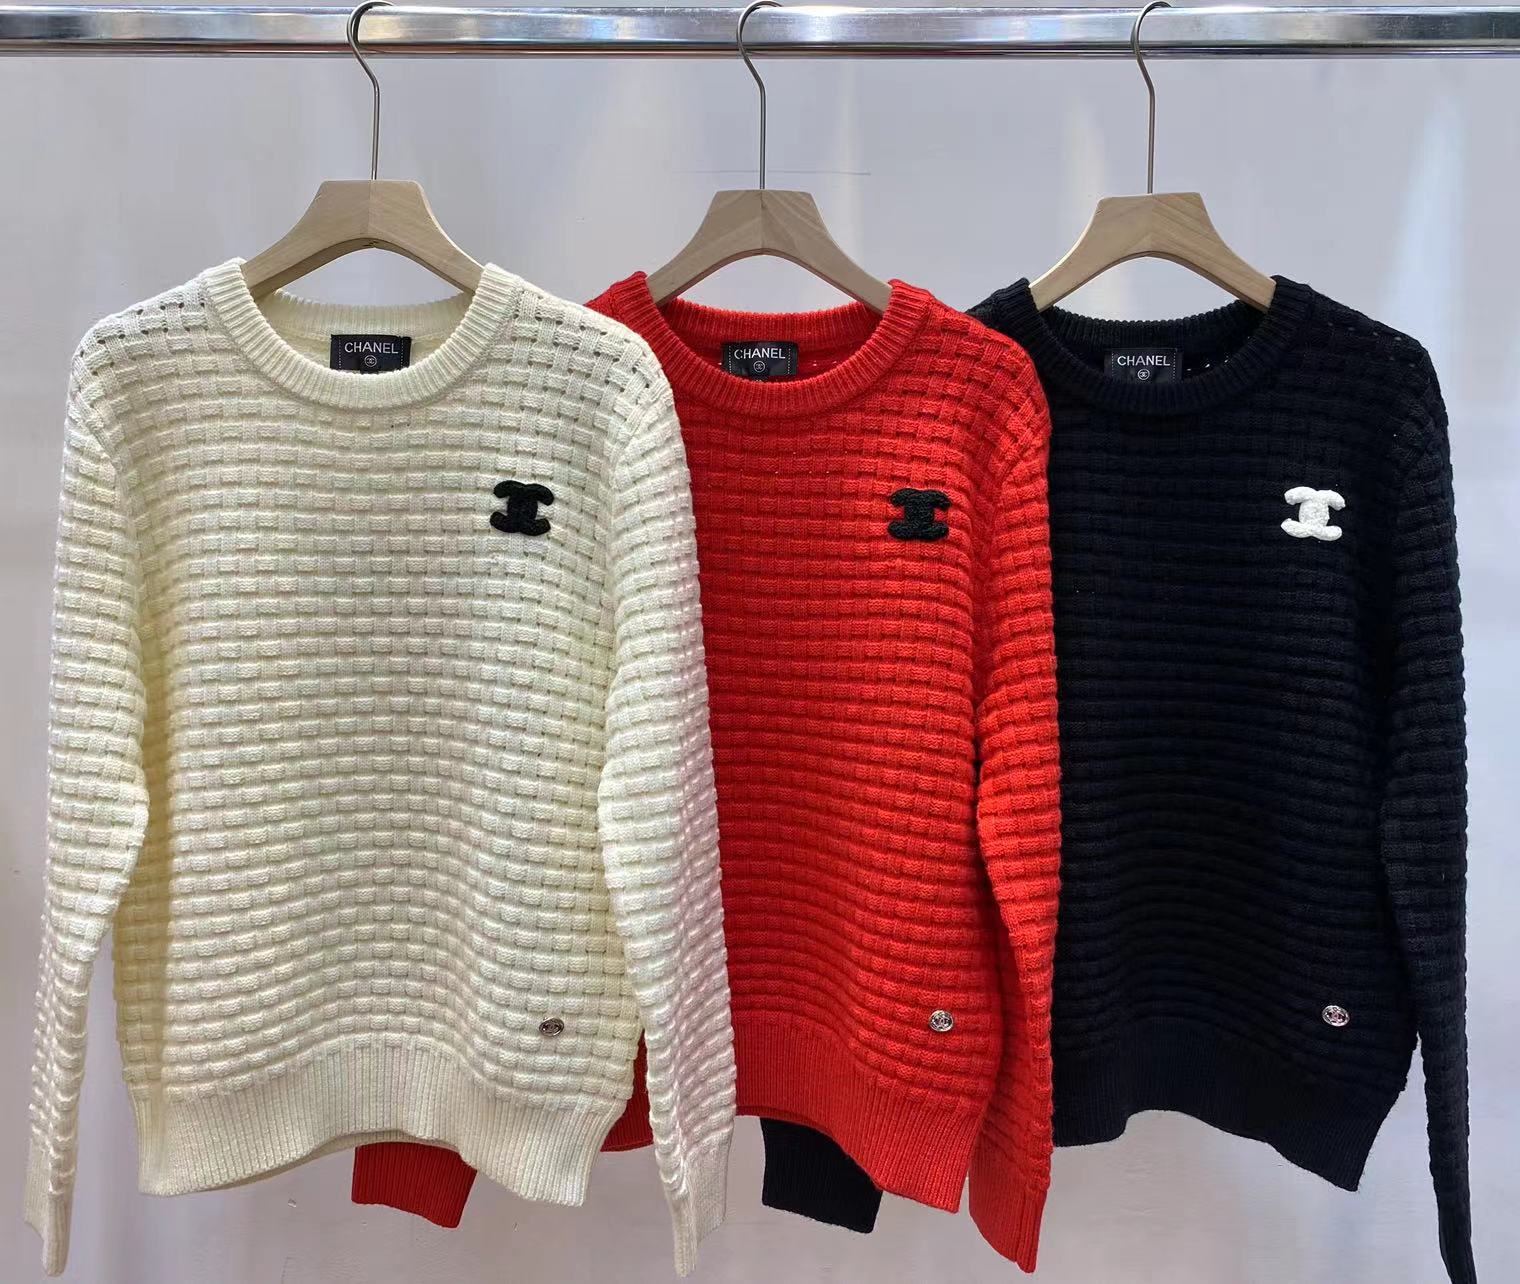 Celine Clothing Sweatshirts Wool Spring Collection